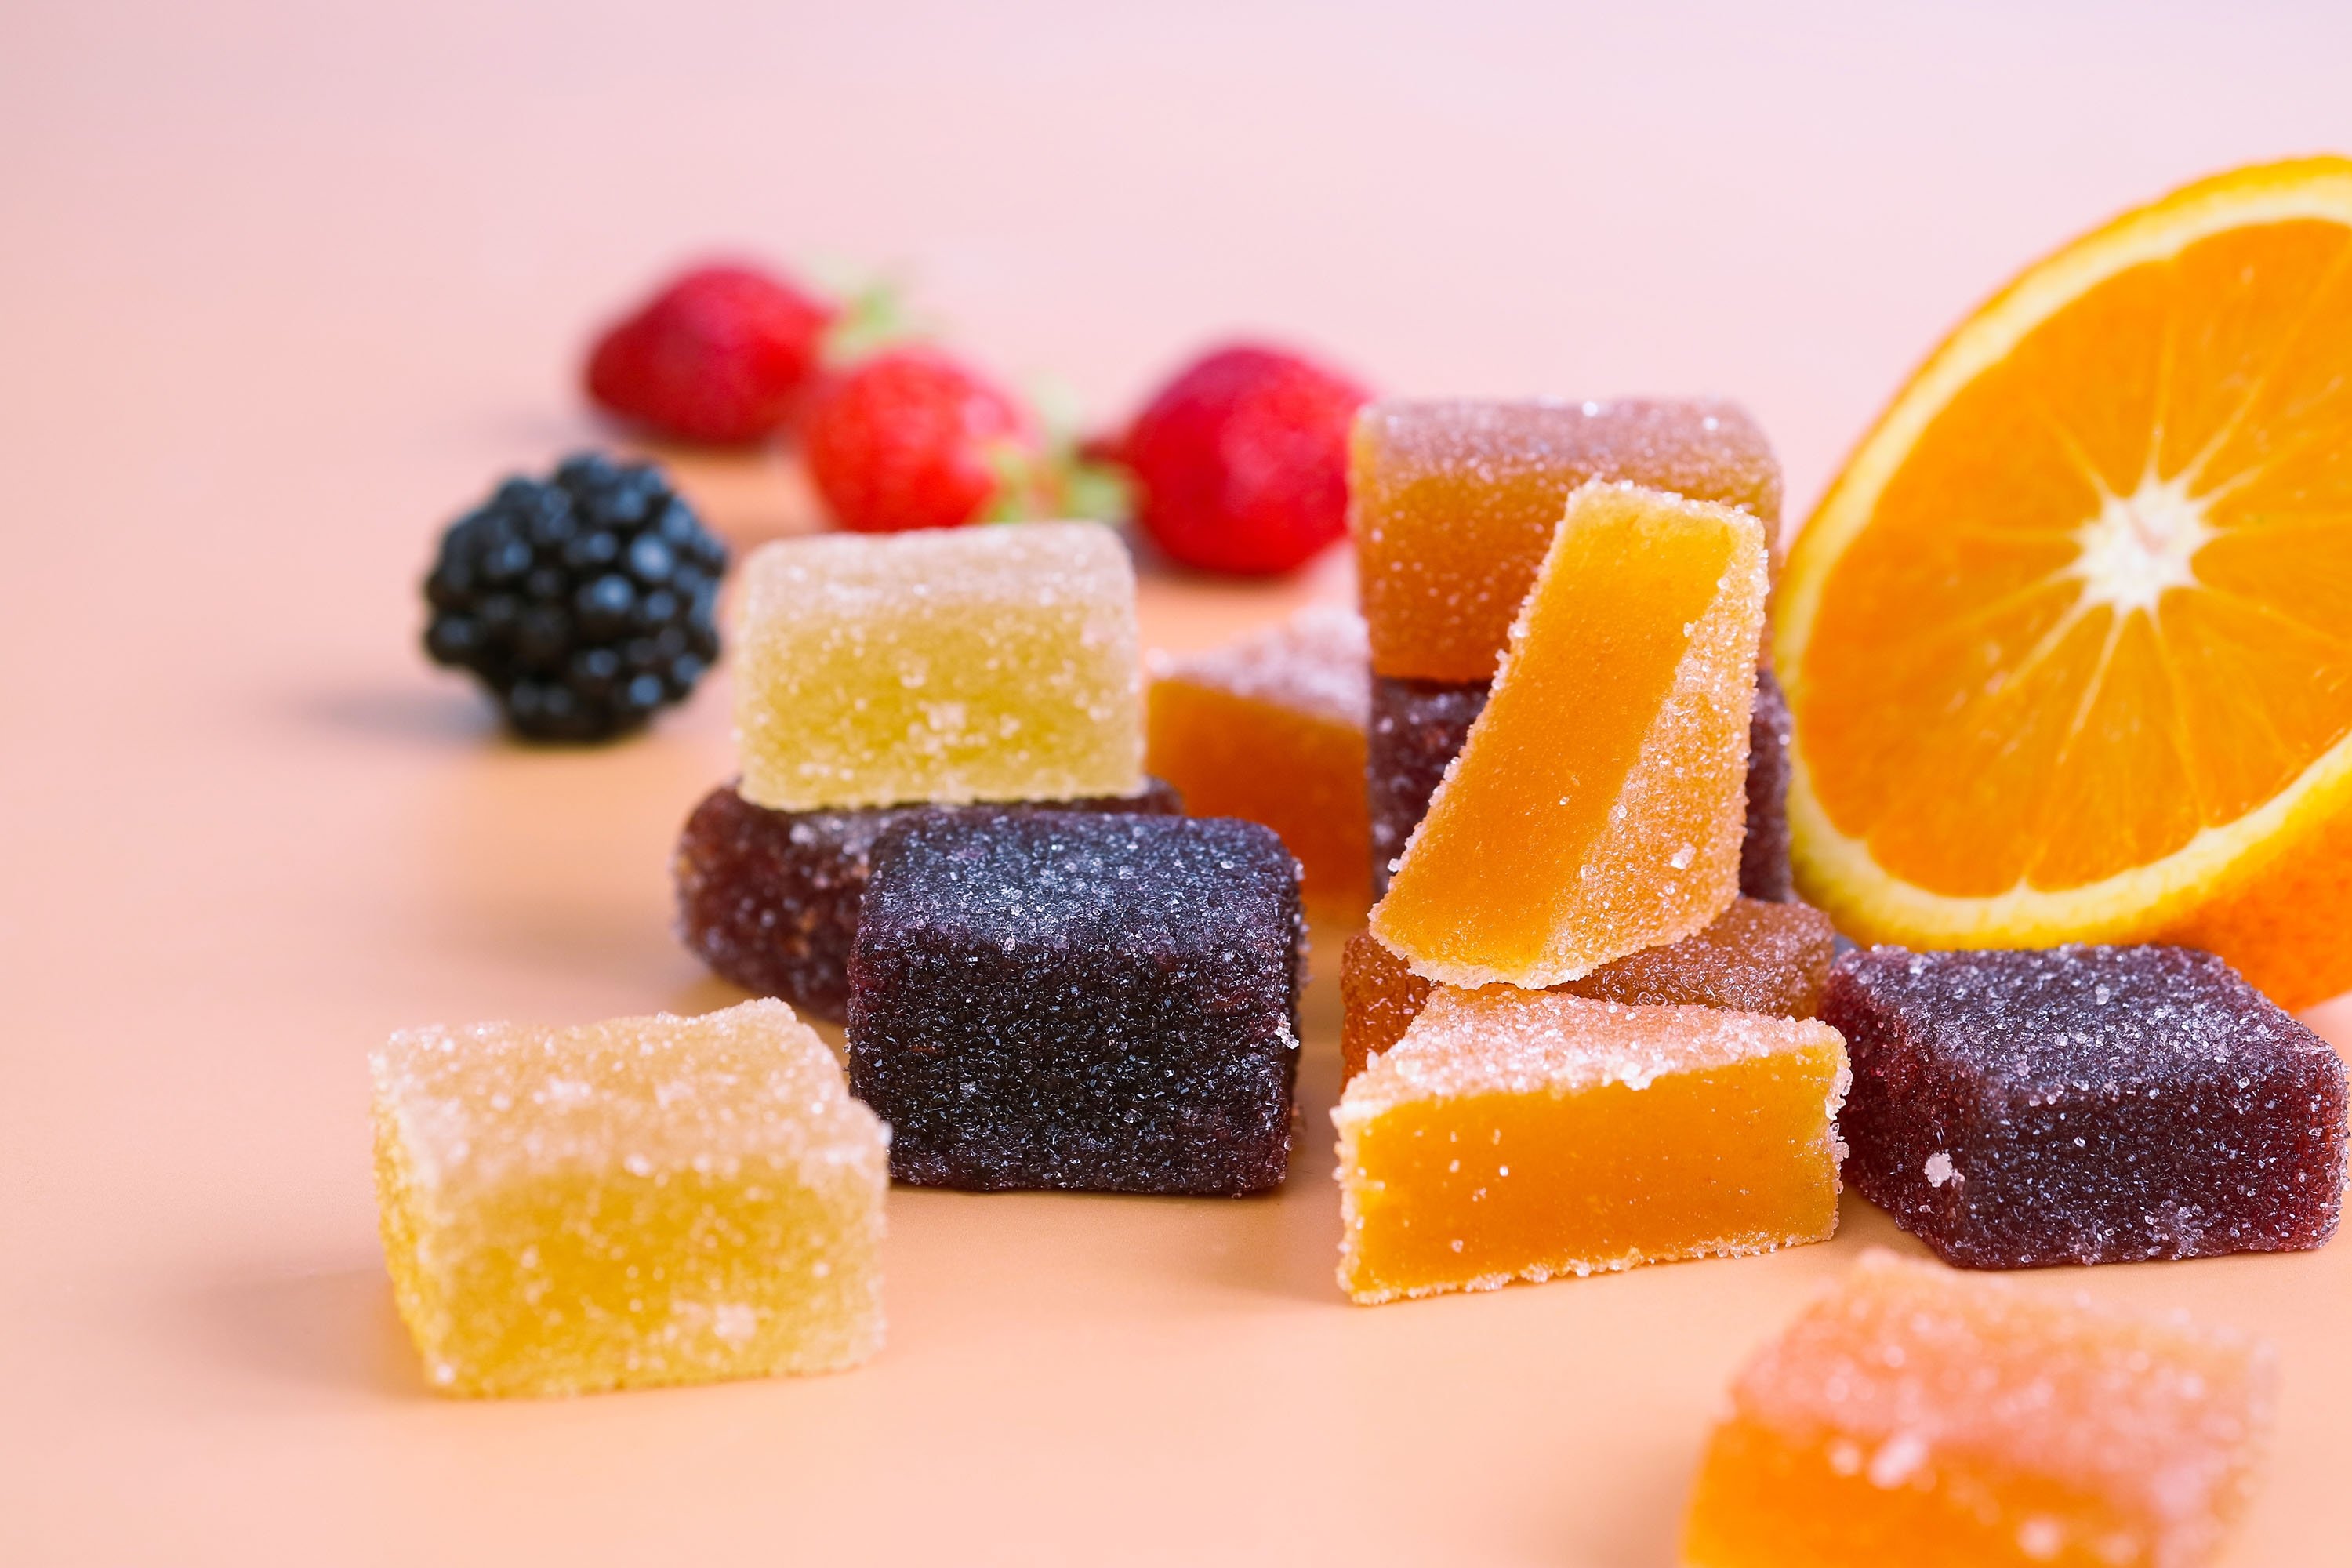 Strawberries, blackberries and oranges are great for homemade fruit jellies. (Shutterstock Photo)